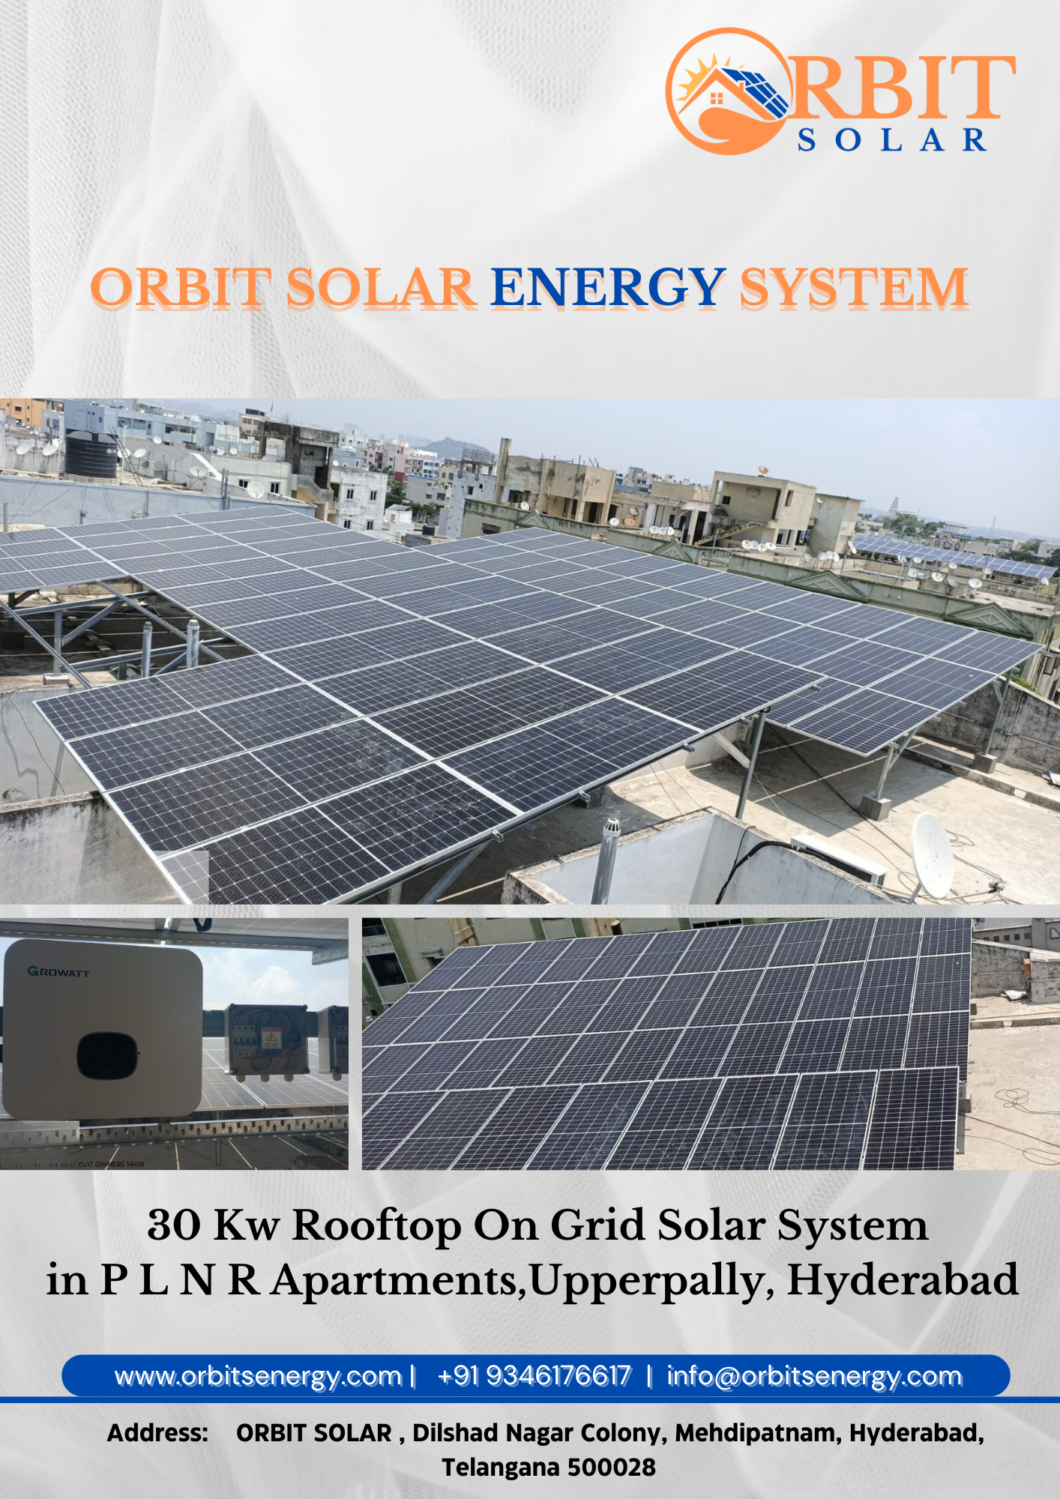 The 35 kw Installation set up in Hyderabad